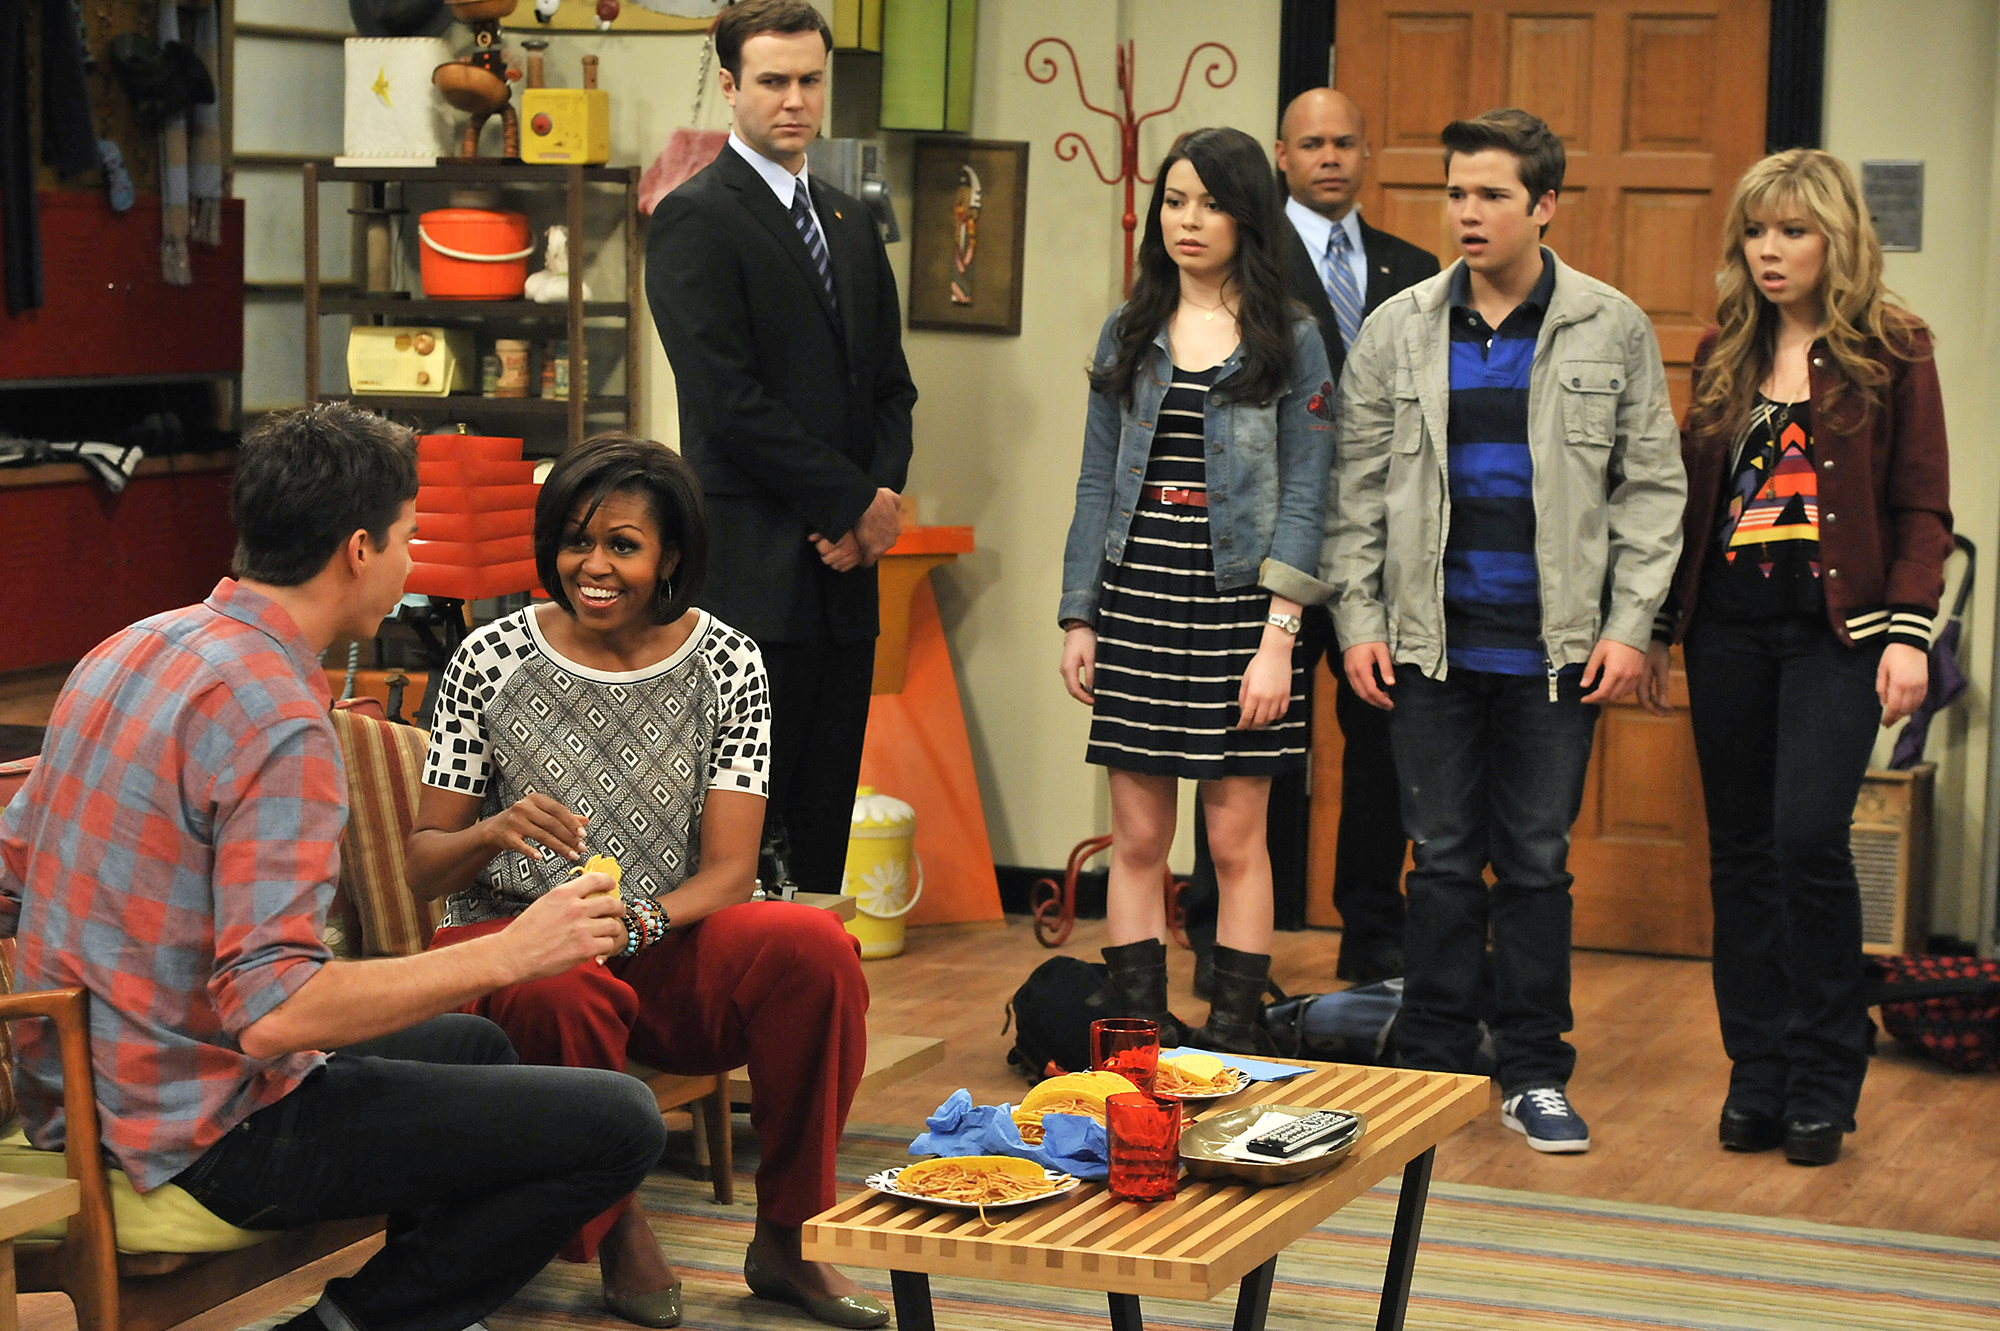 Michelle Obama speaks to Jerry Trainor on iCarly, 2011.